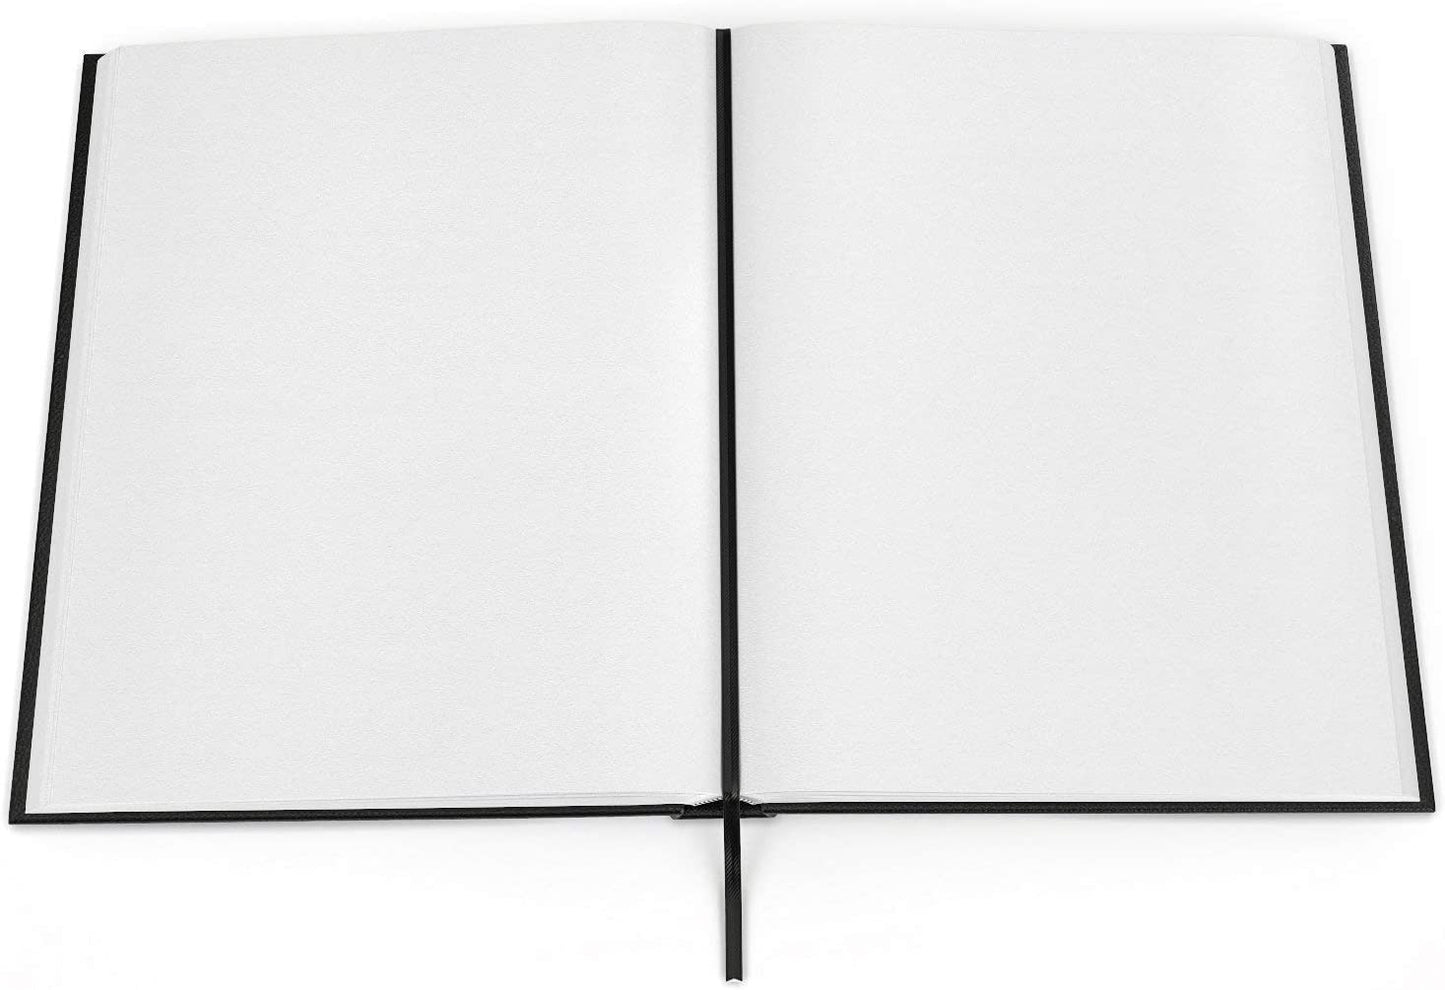  Hardcover Sketchbook, White Pages, 100 sheets/200pages, 110GSM  Paper, Size A5 8.2 x 5.8, Multi Media Art Book Journal : Office Products